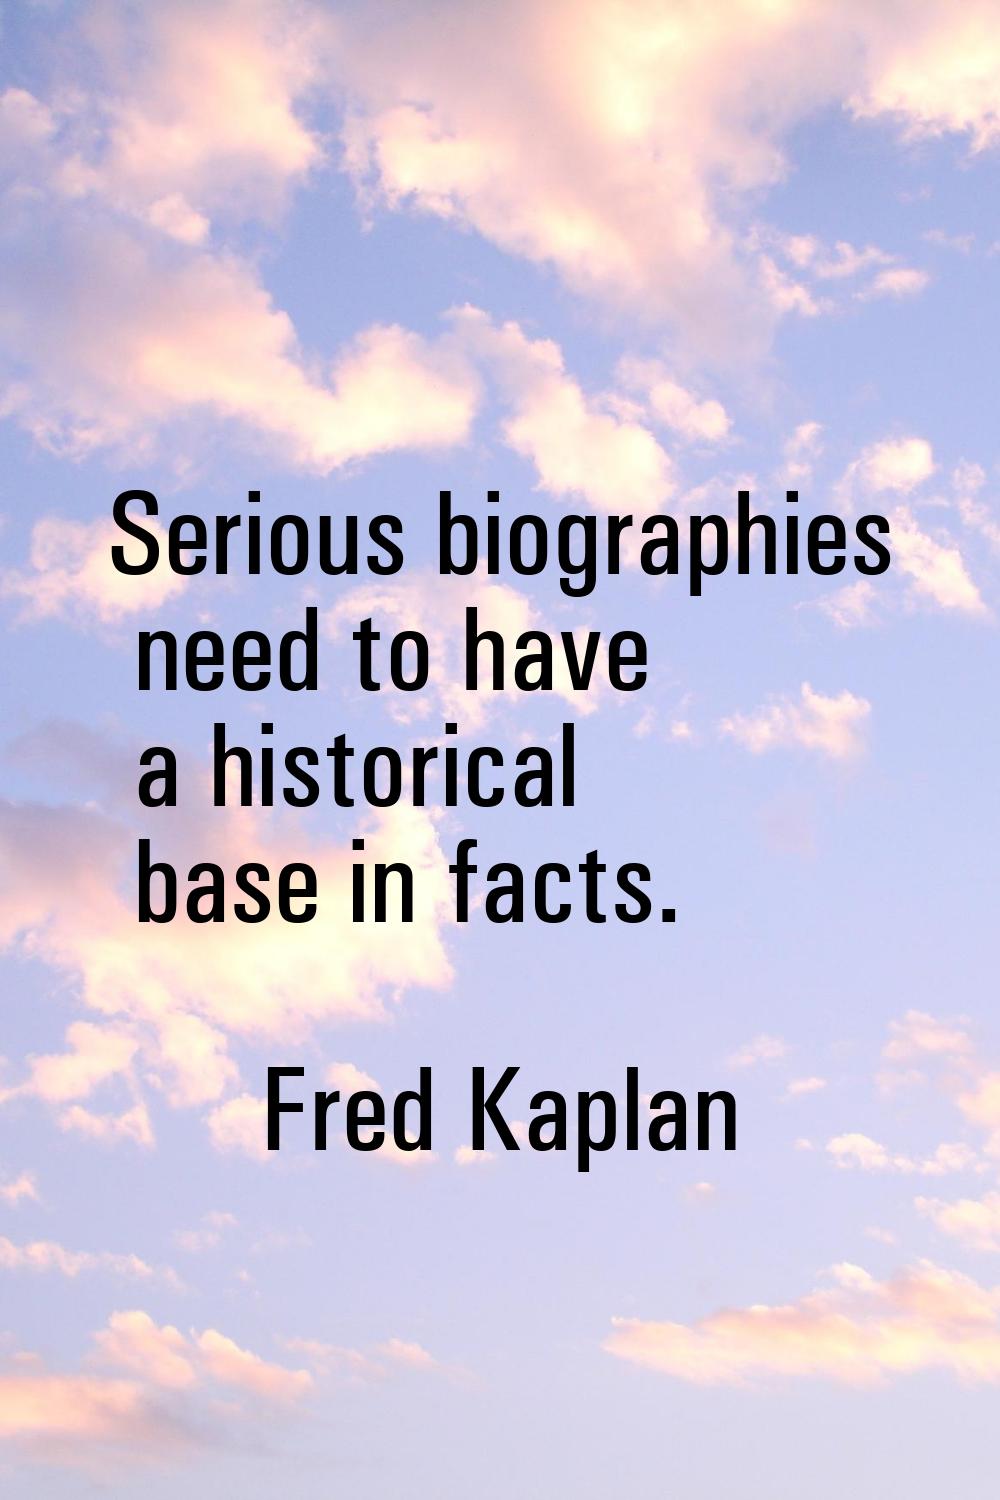 Serious biographies need to have a historical base in facts.